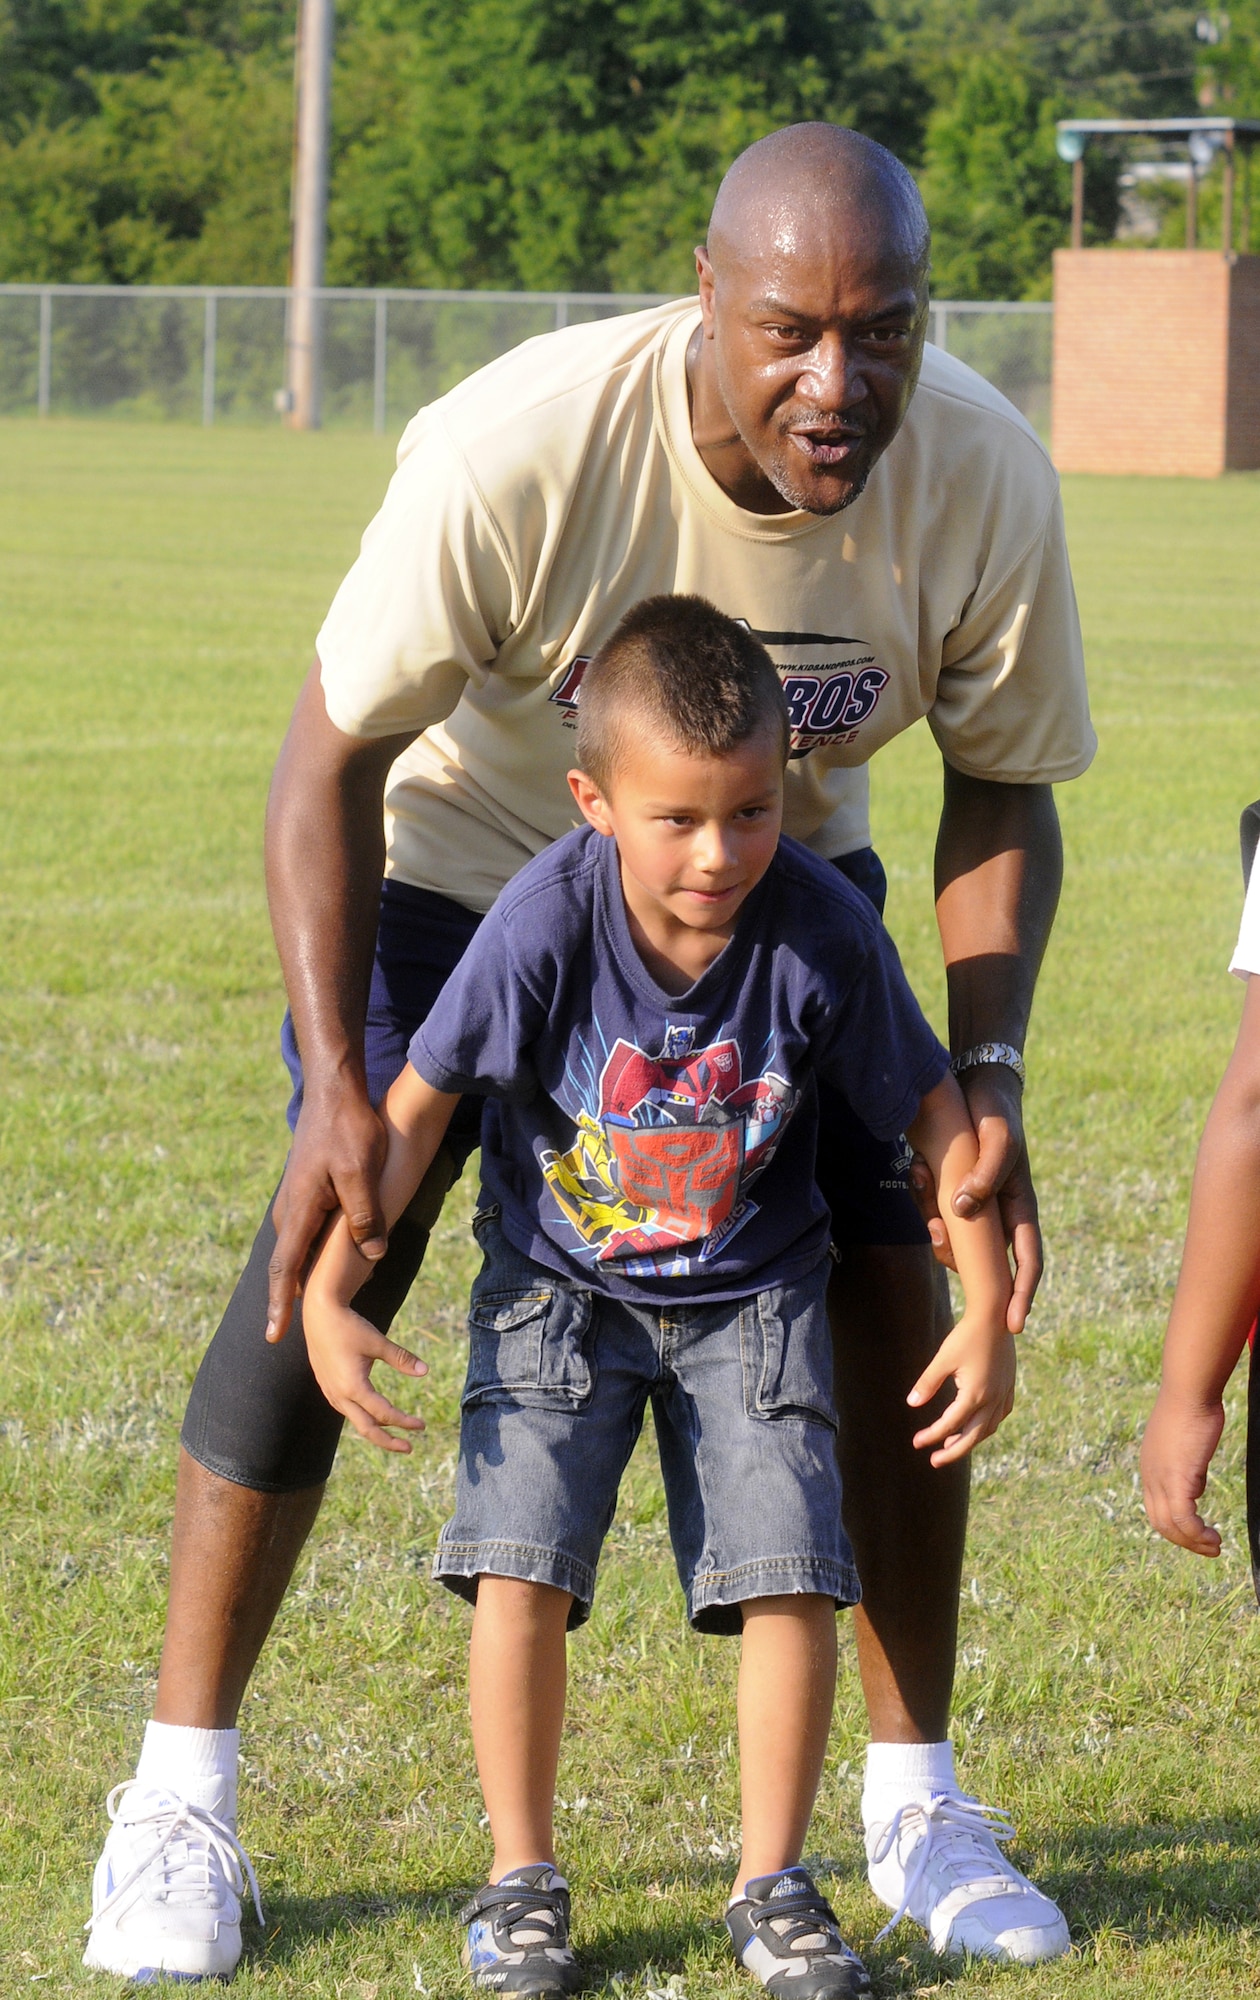 Darryl Holmes, former New England Patriot, coaches Matthew Cox on his stance during a drill at Kids & Pros Youth Football Camp. U. S. Air Force photo by Sue Sapp